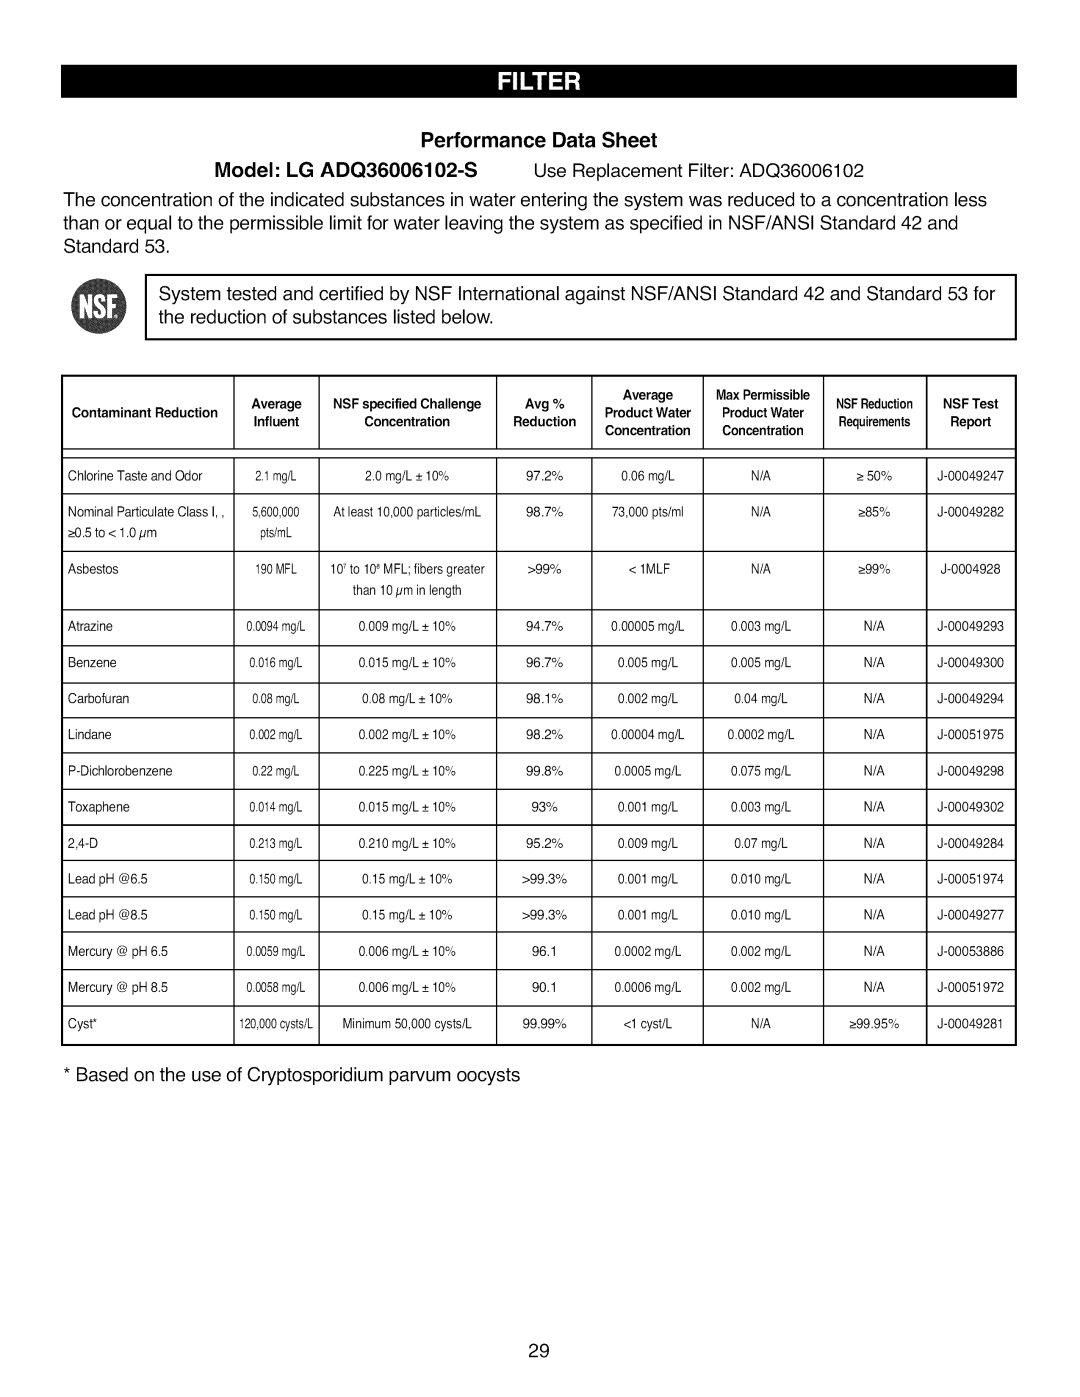 Kenmore 795.7105 manual Performance Data Sheet, Model: LG ADQ36006102-S, Use Replacement Filter ADQ36006102 